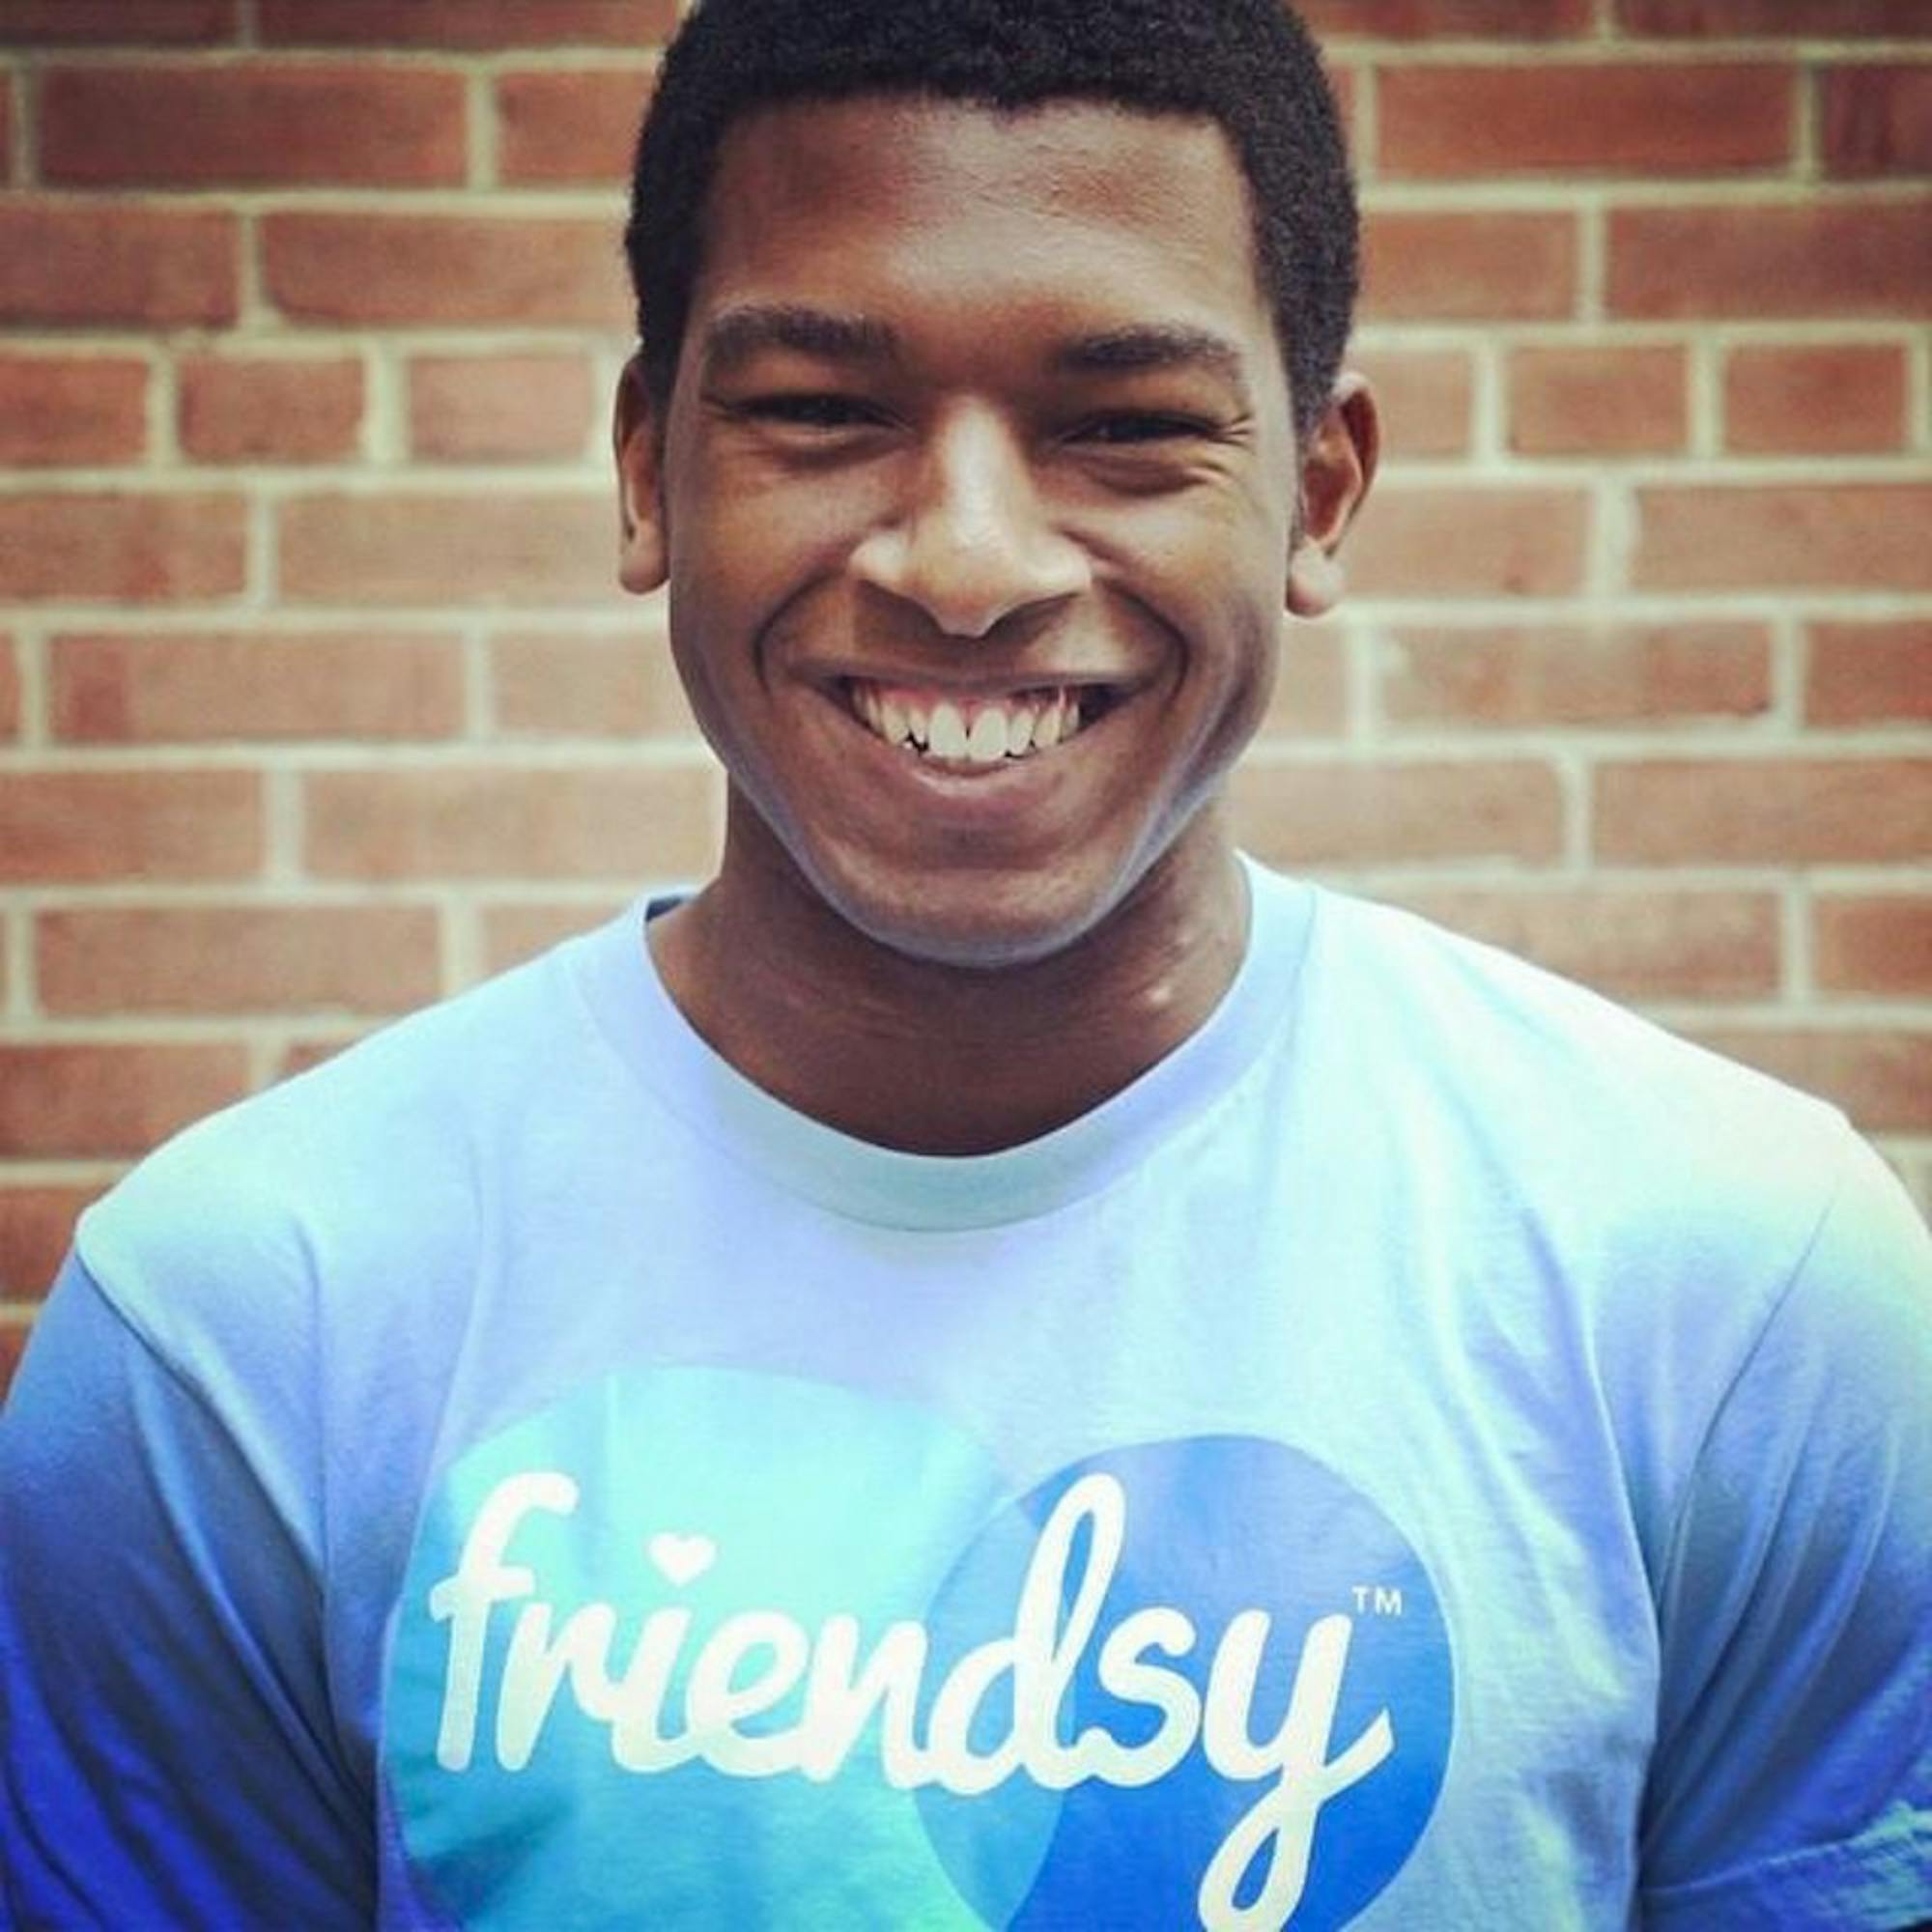 Dylan Sewell is the co-founder of the Friendsy app.